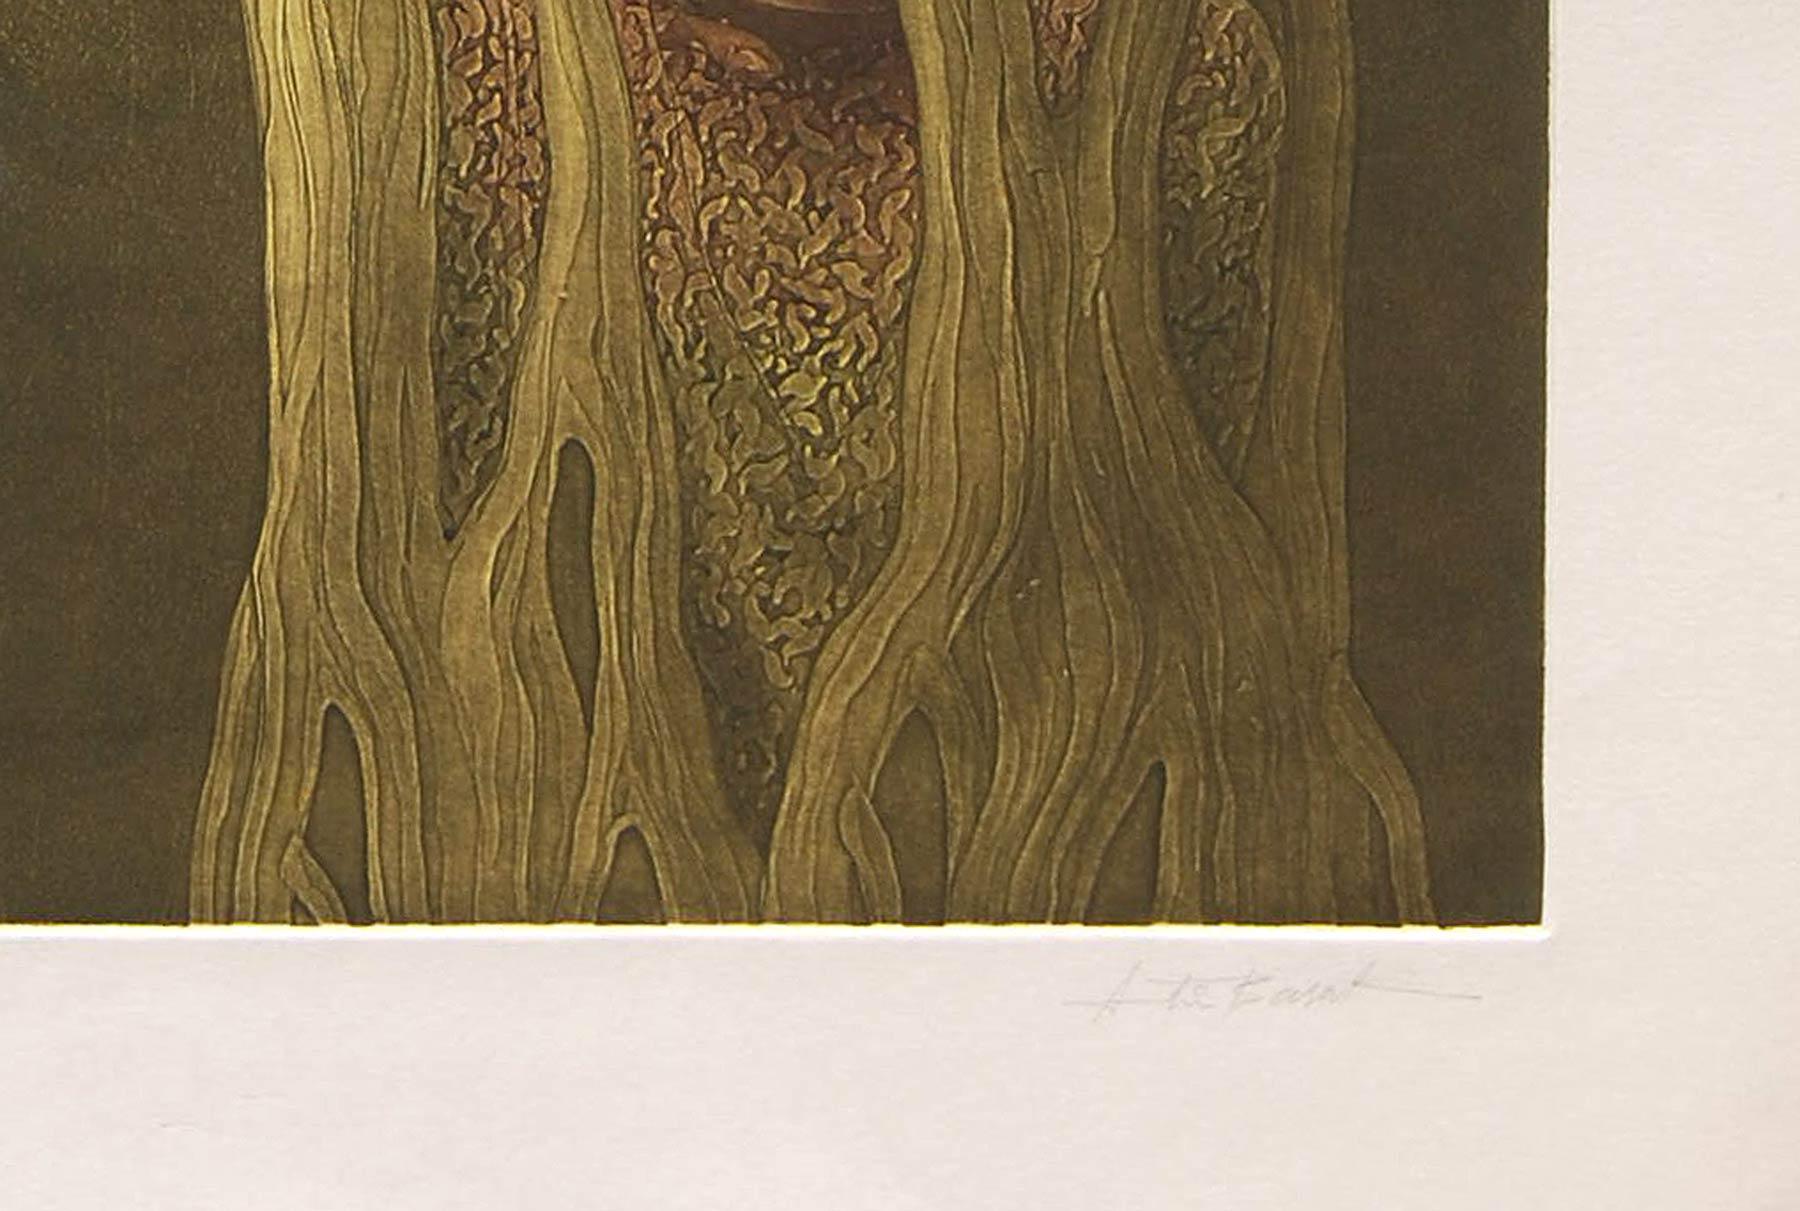 Figurative, Tree, Etching on paper, Green & Brown by Indian Artist 